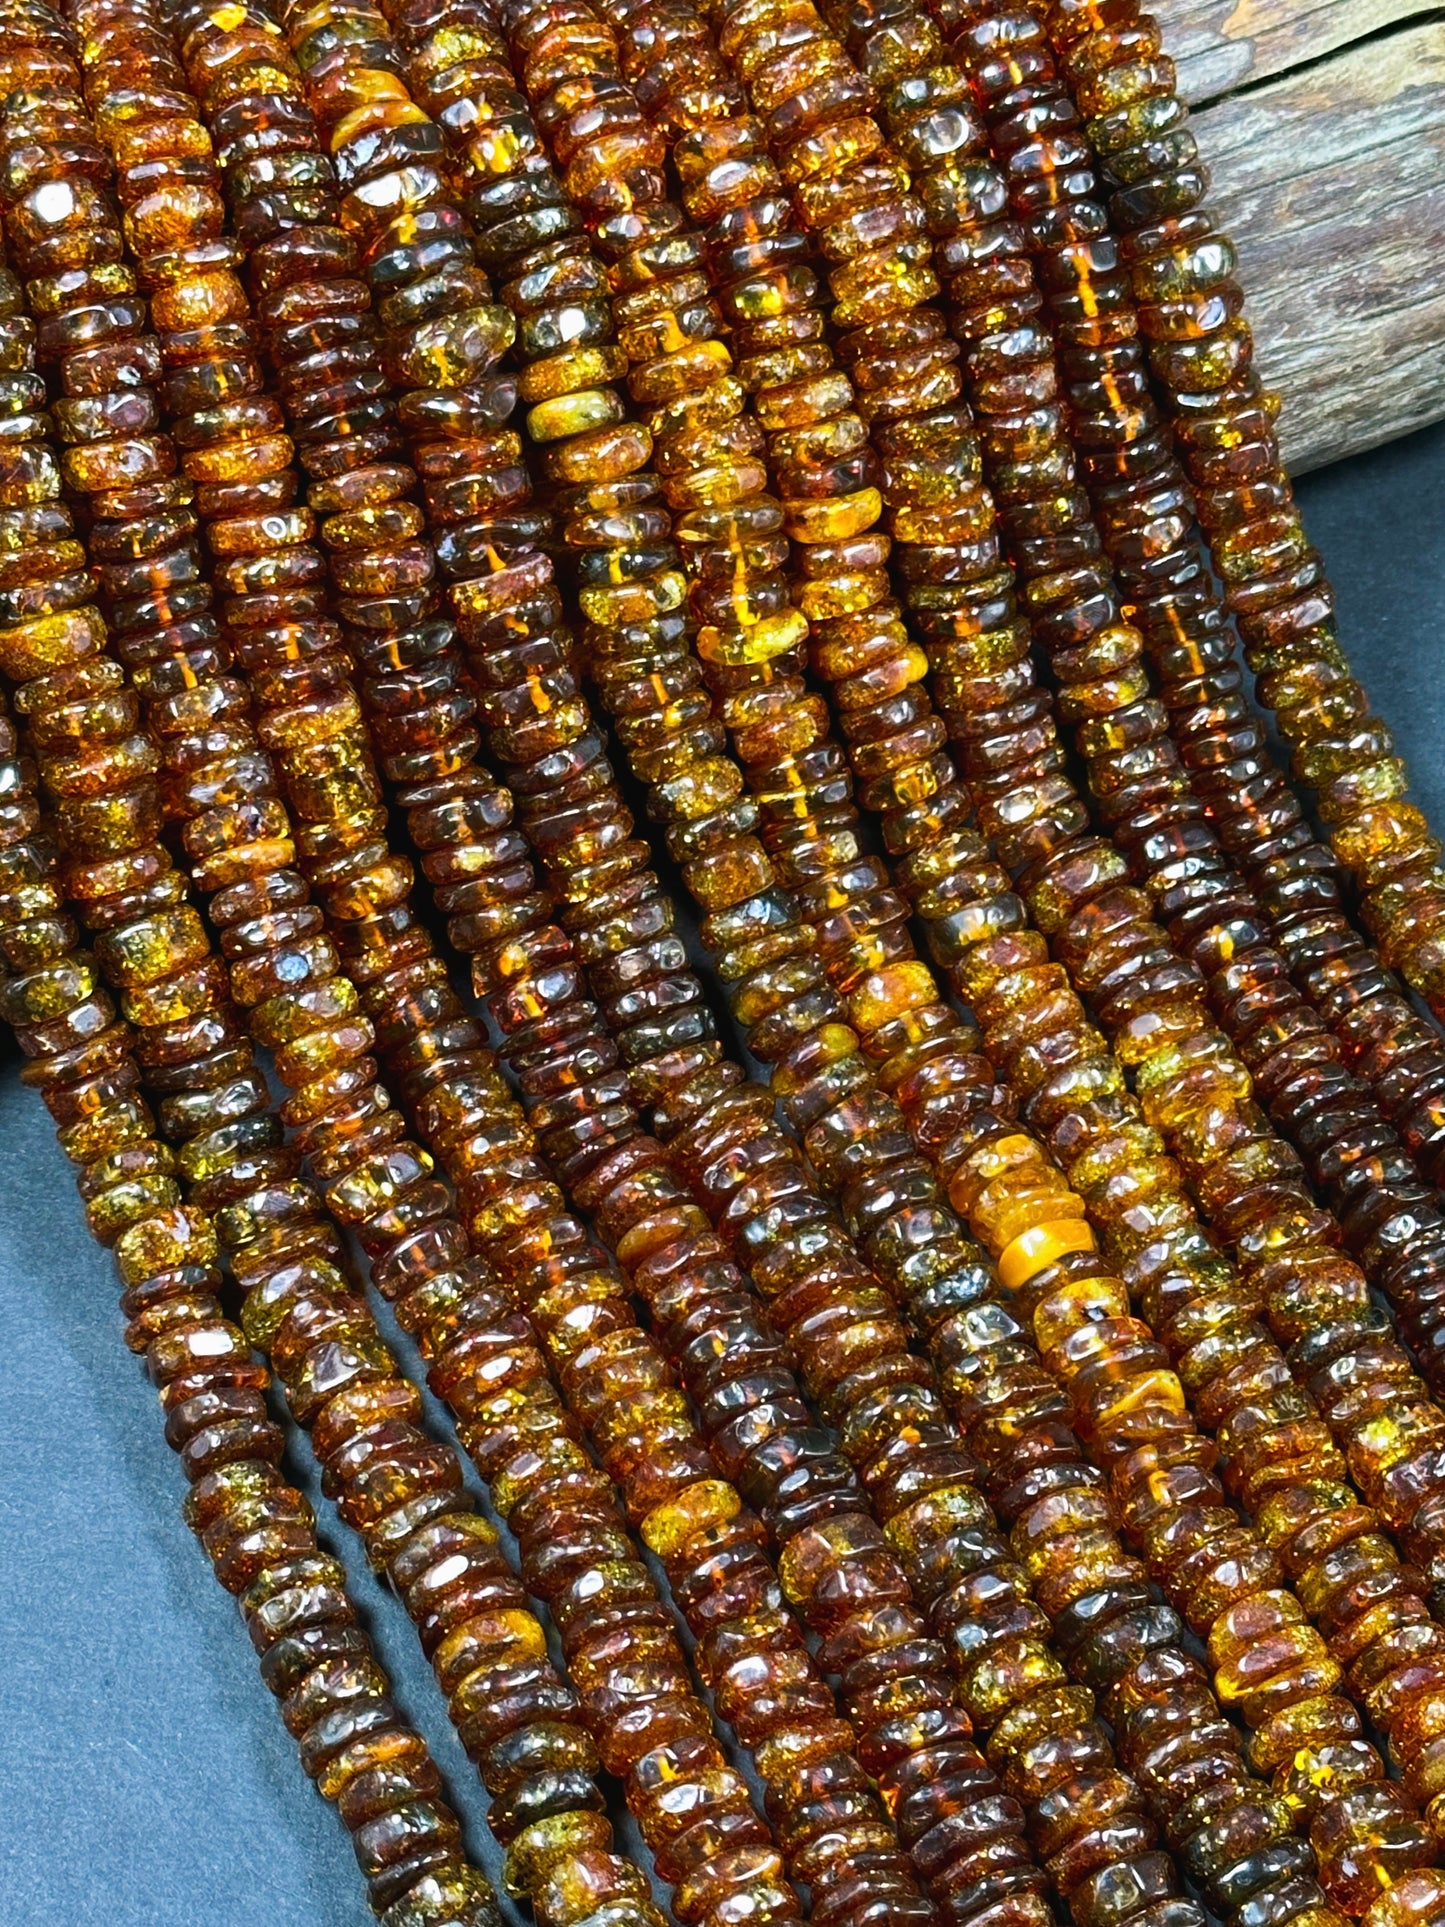 Natural Baltic Amber Gold Stone Bead 8-10mm Rondelle Shape, Beautiful Dark Golden Orange Color Baltic Amber Gold Succinite Beads, Great Quality Full Strand 15.5"